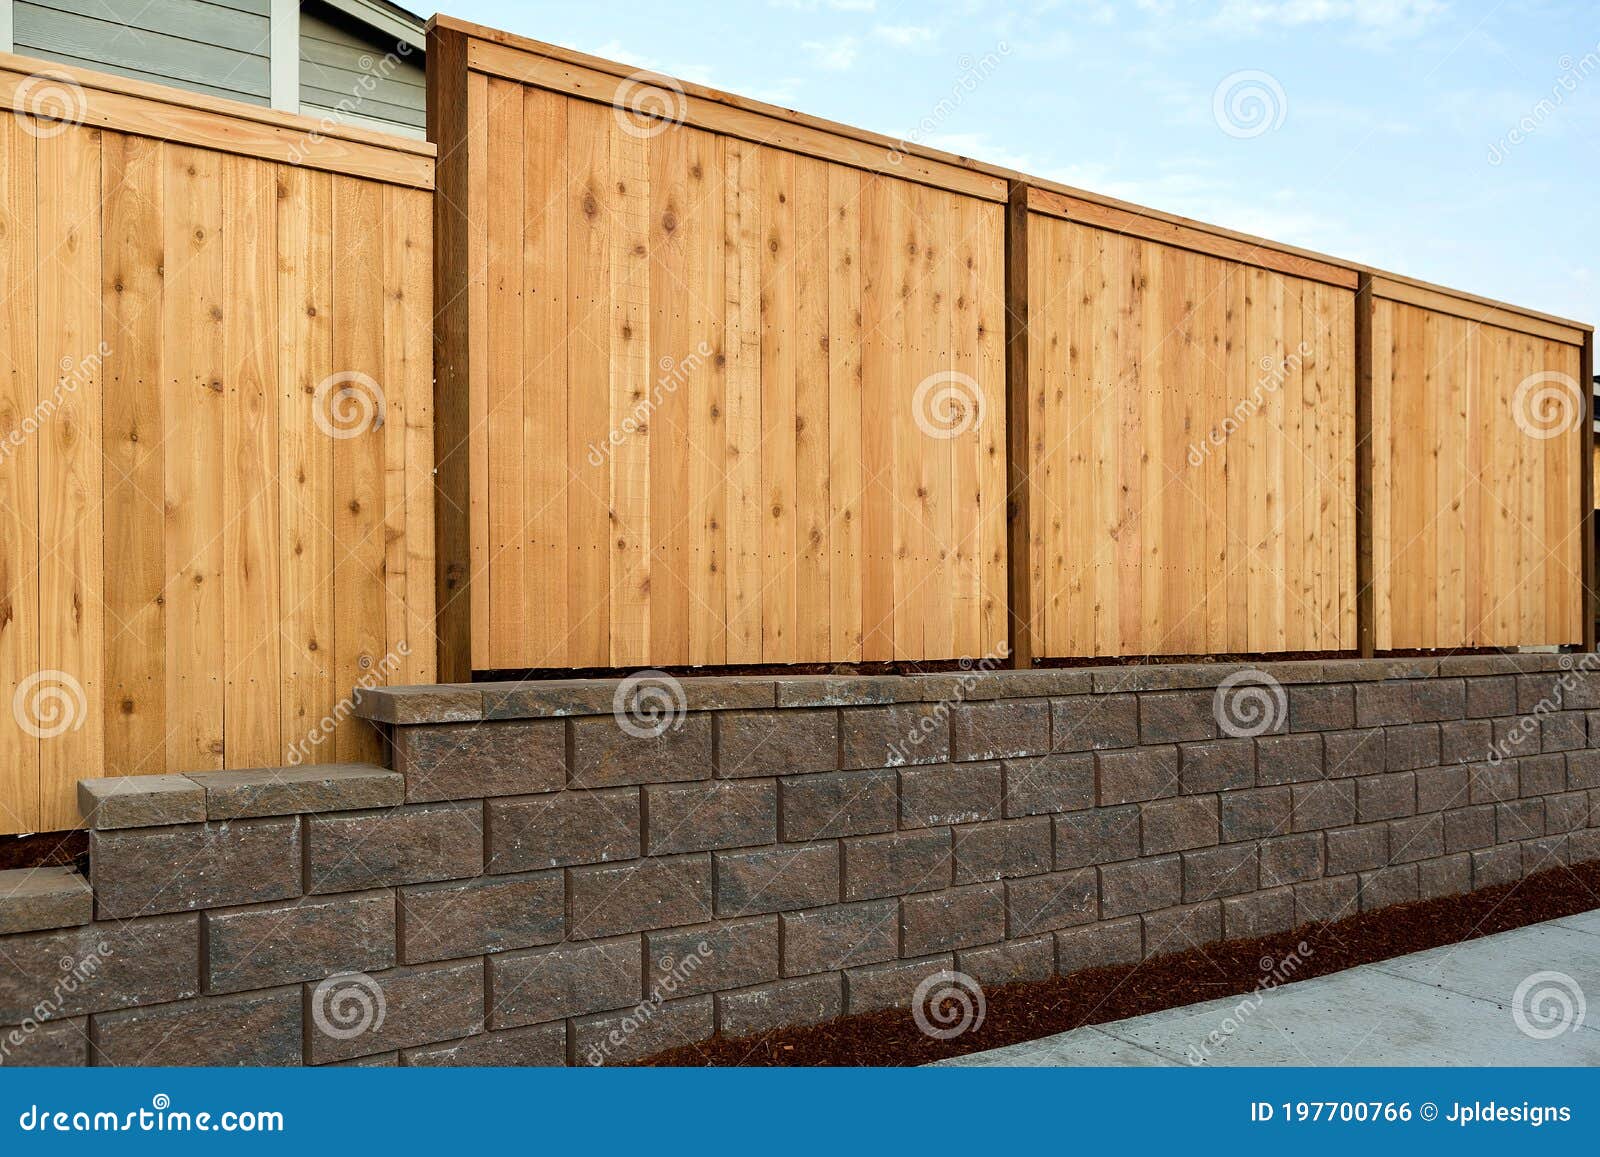 wood fence on stone retaining wall on side of home